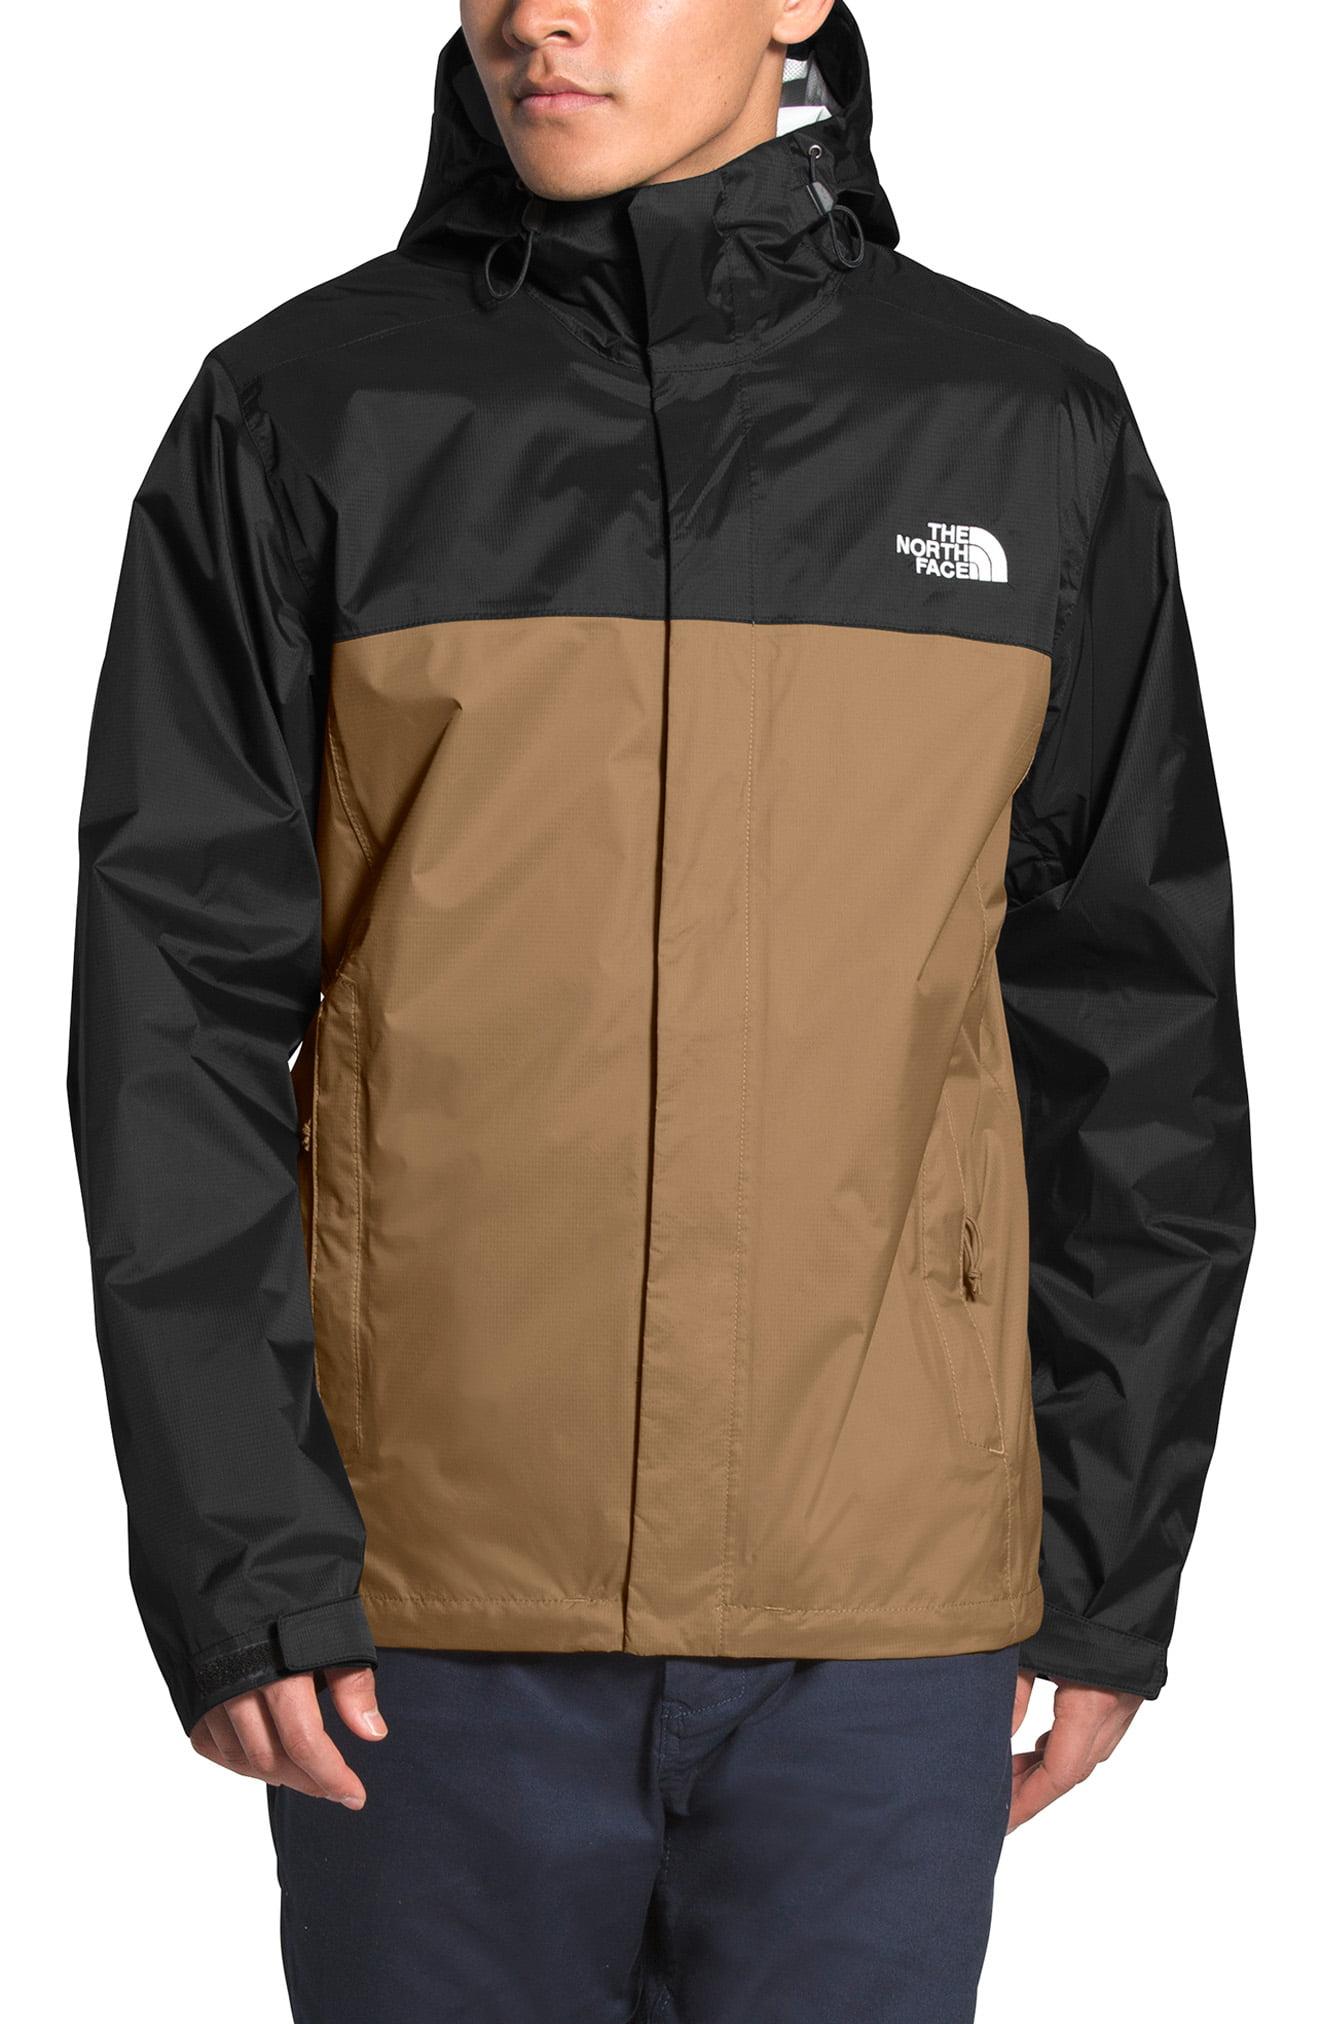 The North Face Venture 2 Hooded Waterproof Rain Jacket for Men - Lyst